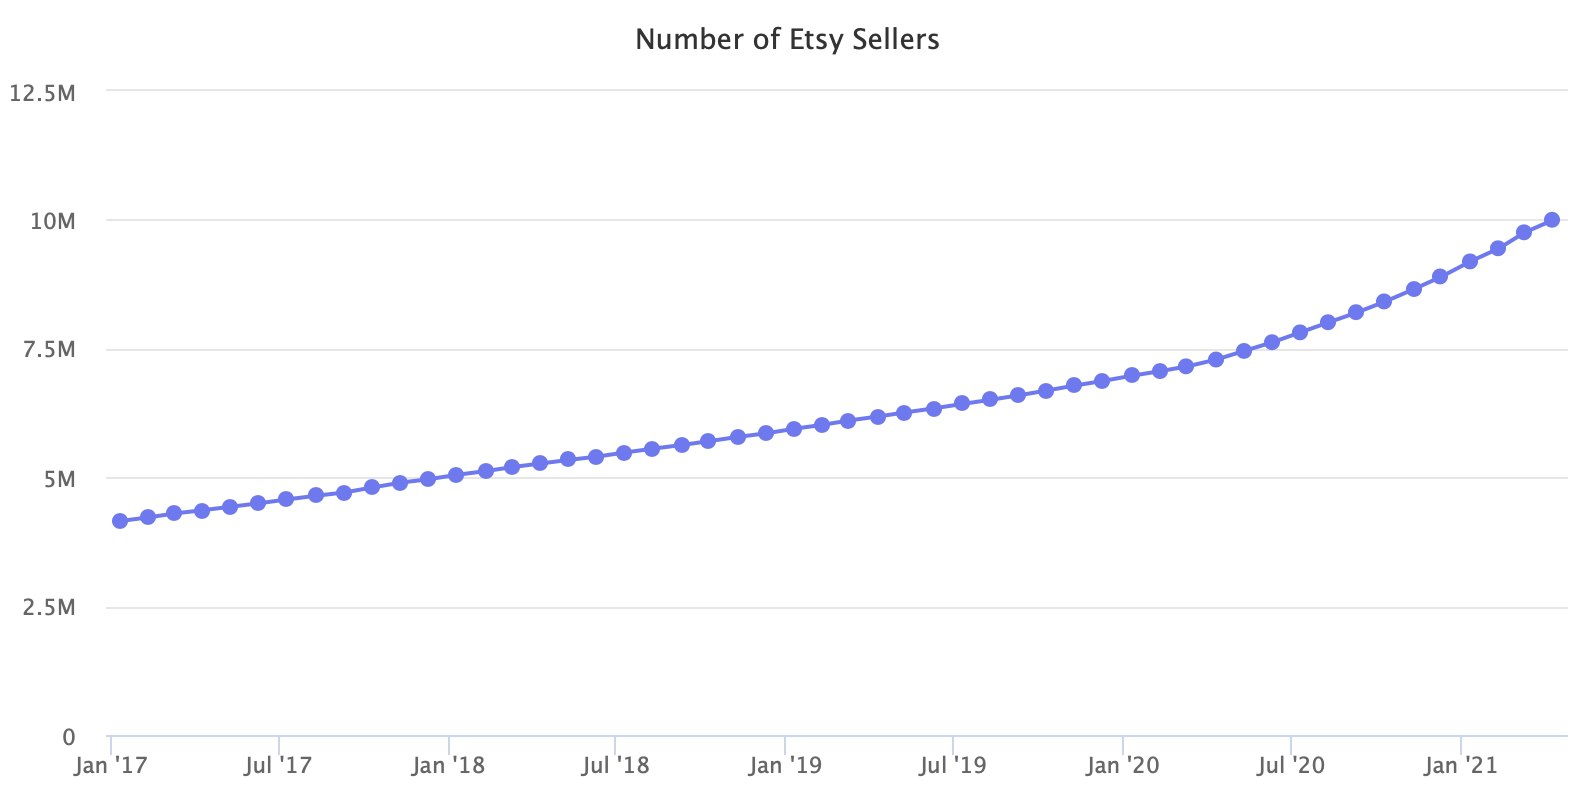 Number of Etsy Sellers